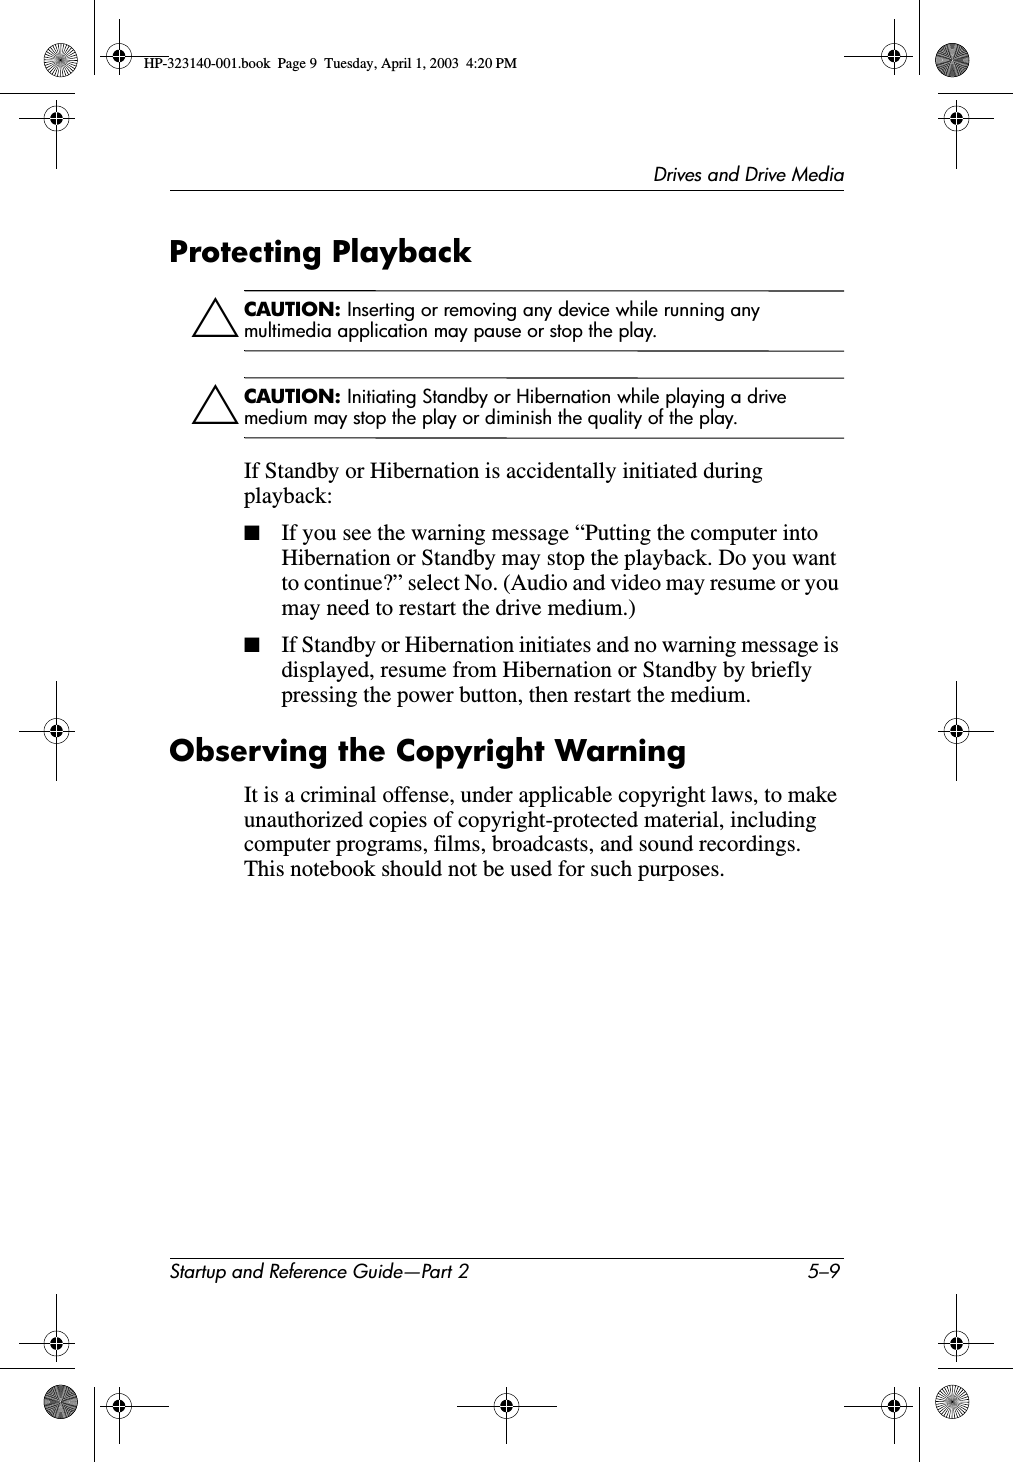 Drives and Drive MediaStartup and Reference Guide—Part 2 5–9Protecting PlaybackÄCAUTION: Inserting or removing any device while running any multimedia application may pause or stop the play.ÄCAUTION: Initiating Standby or Hibernation while playing a drive medium may stop the play or diminish the quality of the play.If Standby or Hibernation is accidentally initiated during playback:■If you see the warning message “Putting the computer into Hibernation or Standby may stop the playback. Do you want to continue?” select No. (Audio and video may resume or you may need to restart the drive medium.)■If Standby or Hibernation initiates and no warning message is displayed, resume from Hibernation or Standby by briefly pressing the power button, then restart the medium.Observing the Copyright WarningIt is a criminal offense, under applicable copyright laws, to make unauthorized copies of copyright-protected material, including computer programs, films, broadcasts, and sound recordings. This notebook should not be used for such purposes.HP-323140-001.book  Page 9  Tuesday, April 1, 2003  4:20 PM